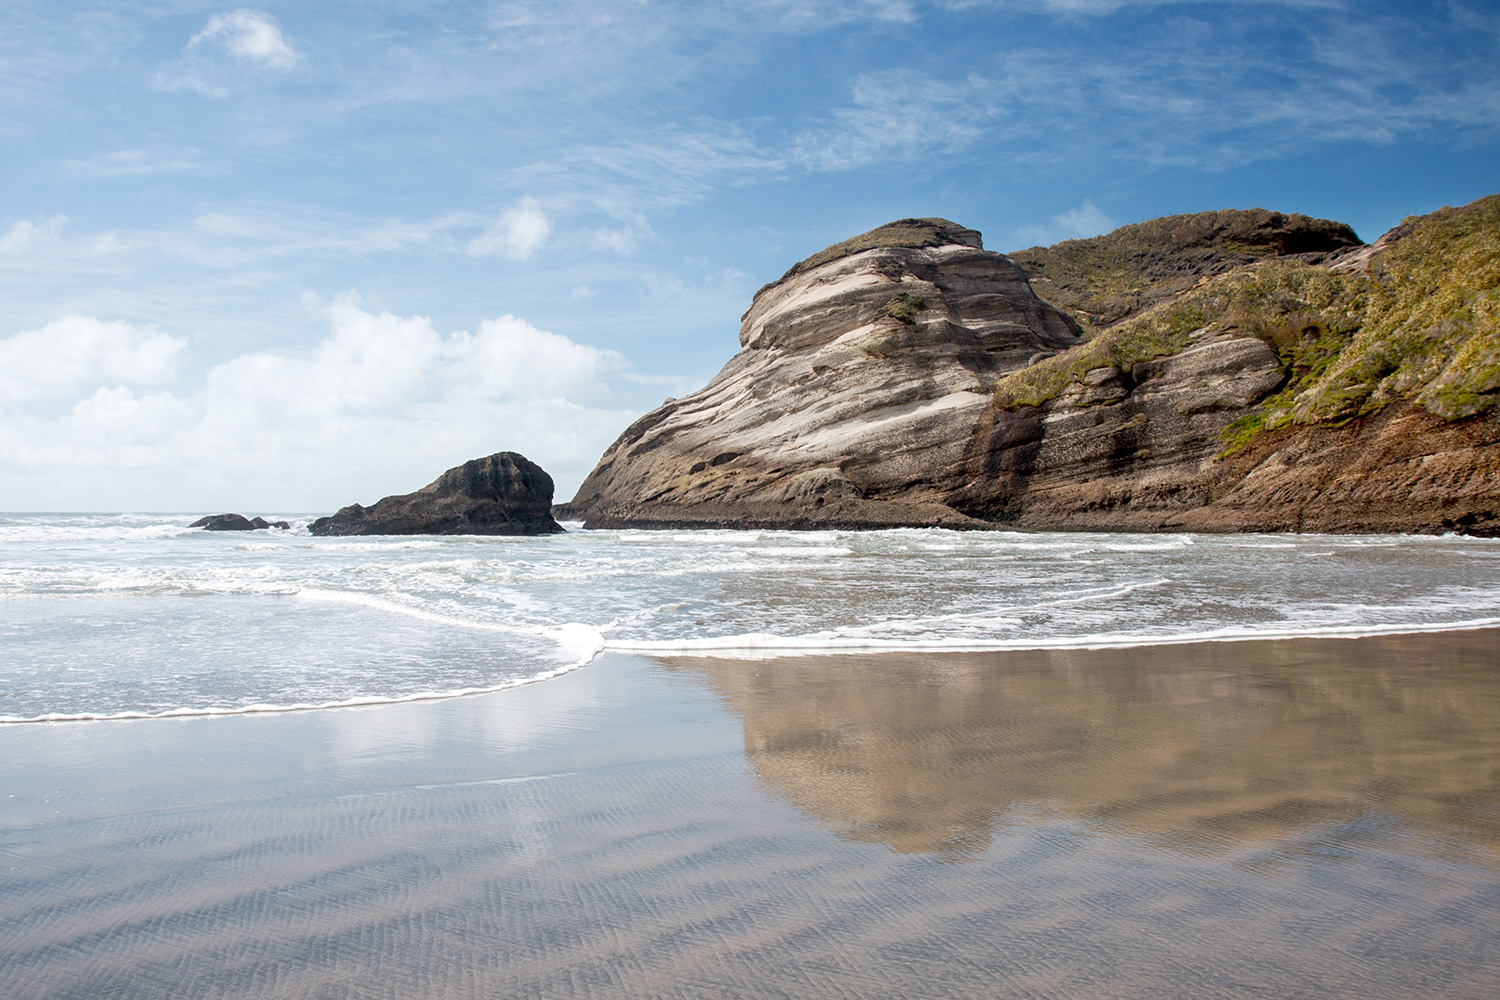 Look but don't touch: Wharariki Beach is ruggedly handsome but too stormy to surf or swim. Image by Andrea Schaffer / CC BY 2.0